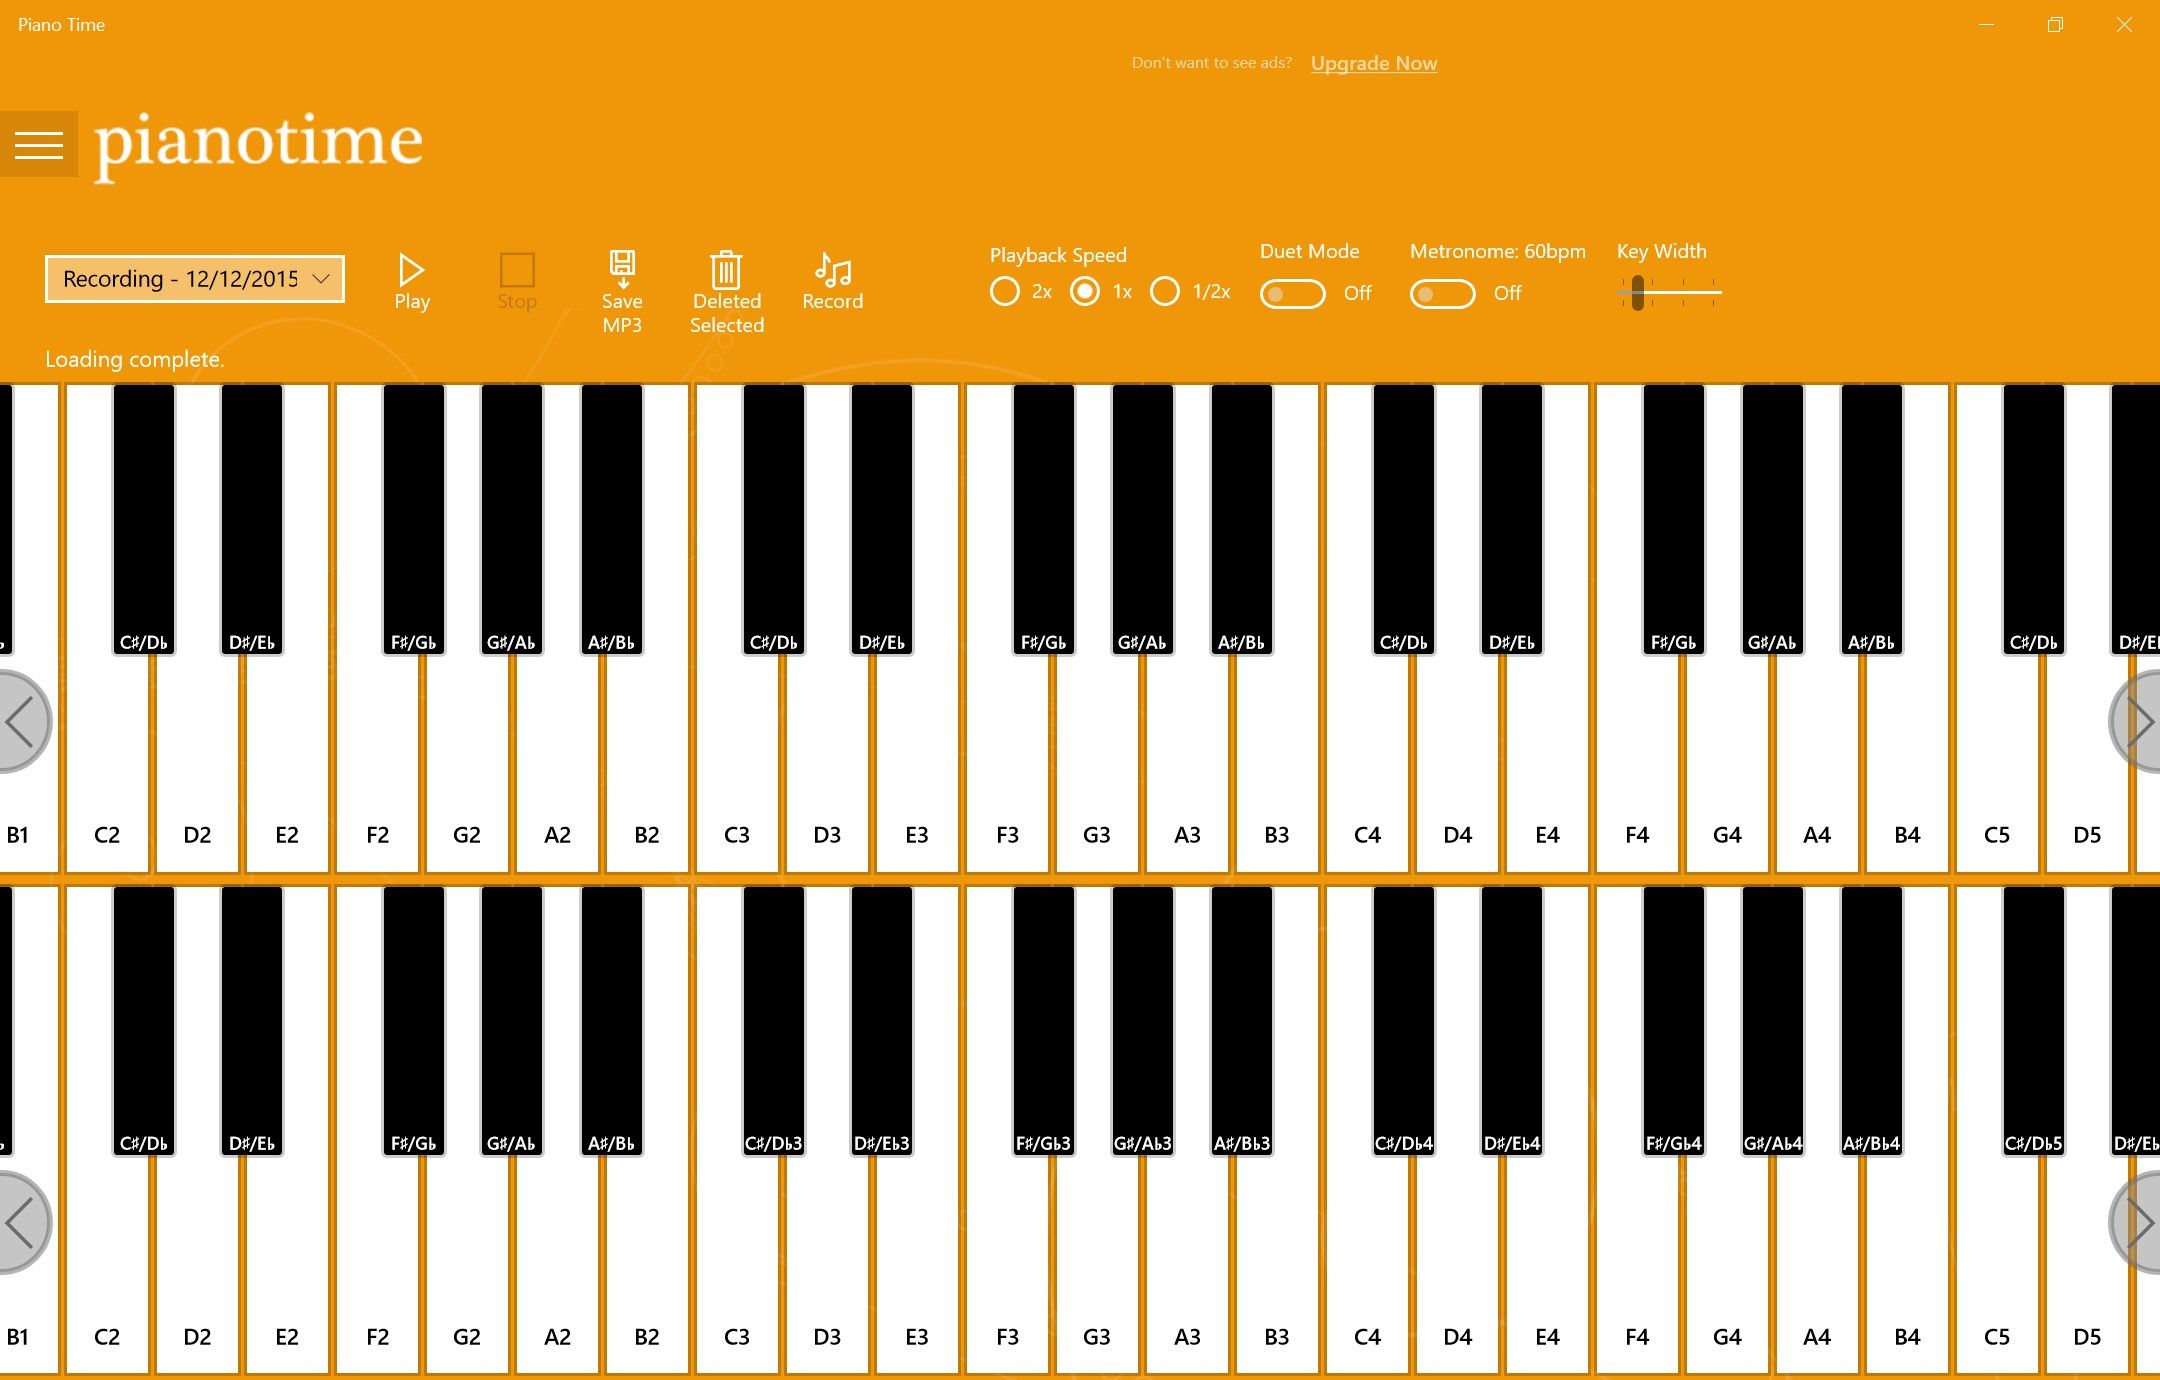 play piano with touchscreen, keyboard, or mouse. Save your recordings for later.